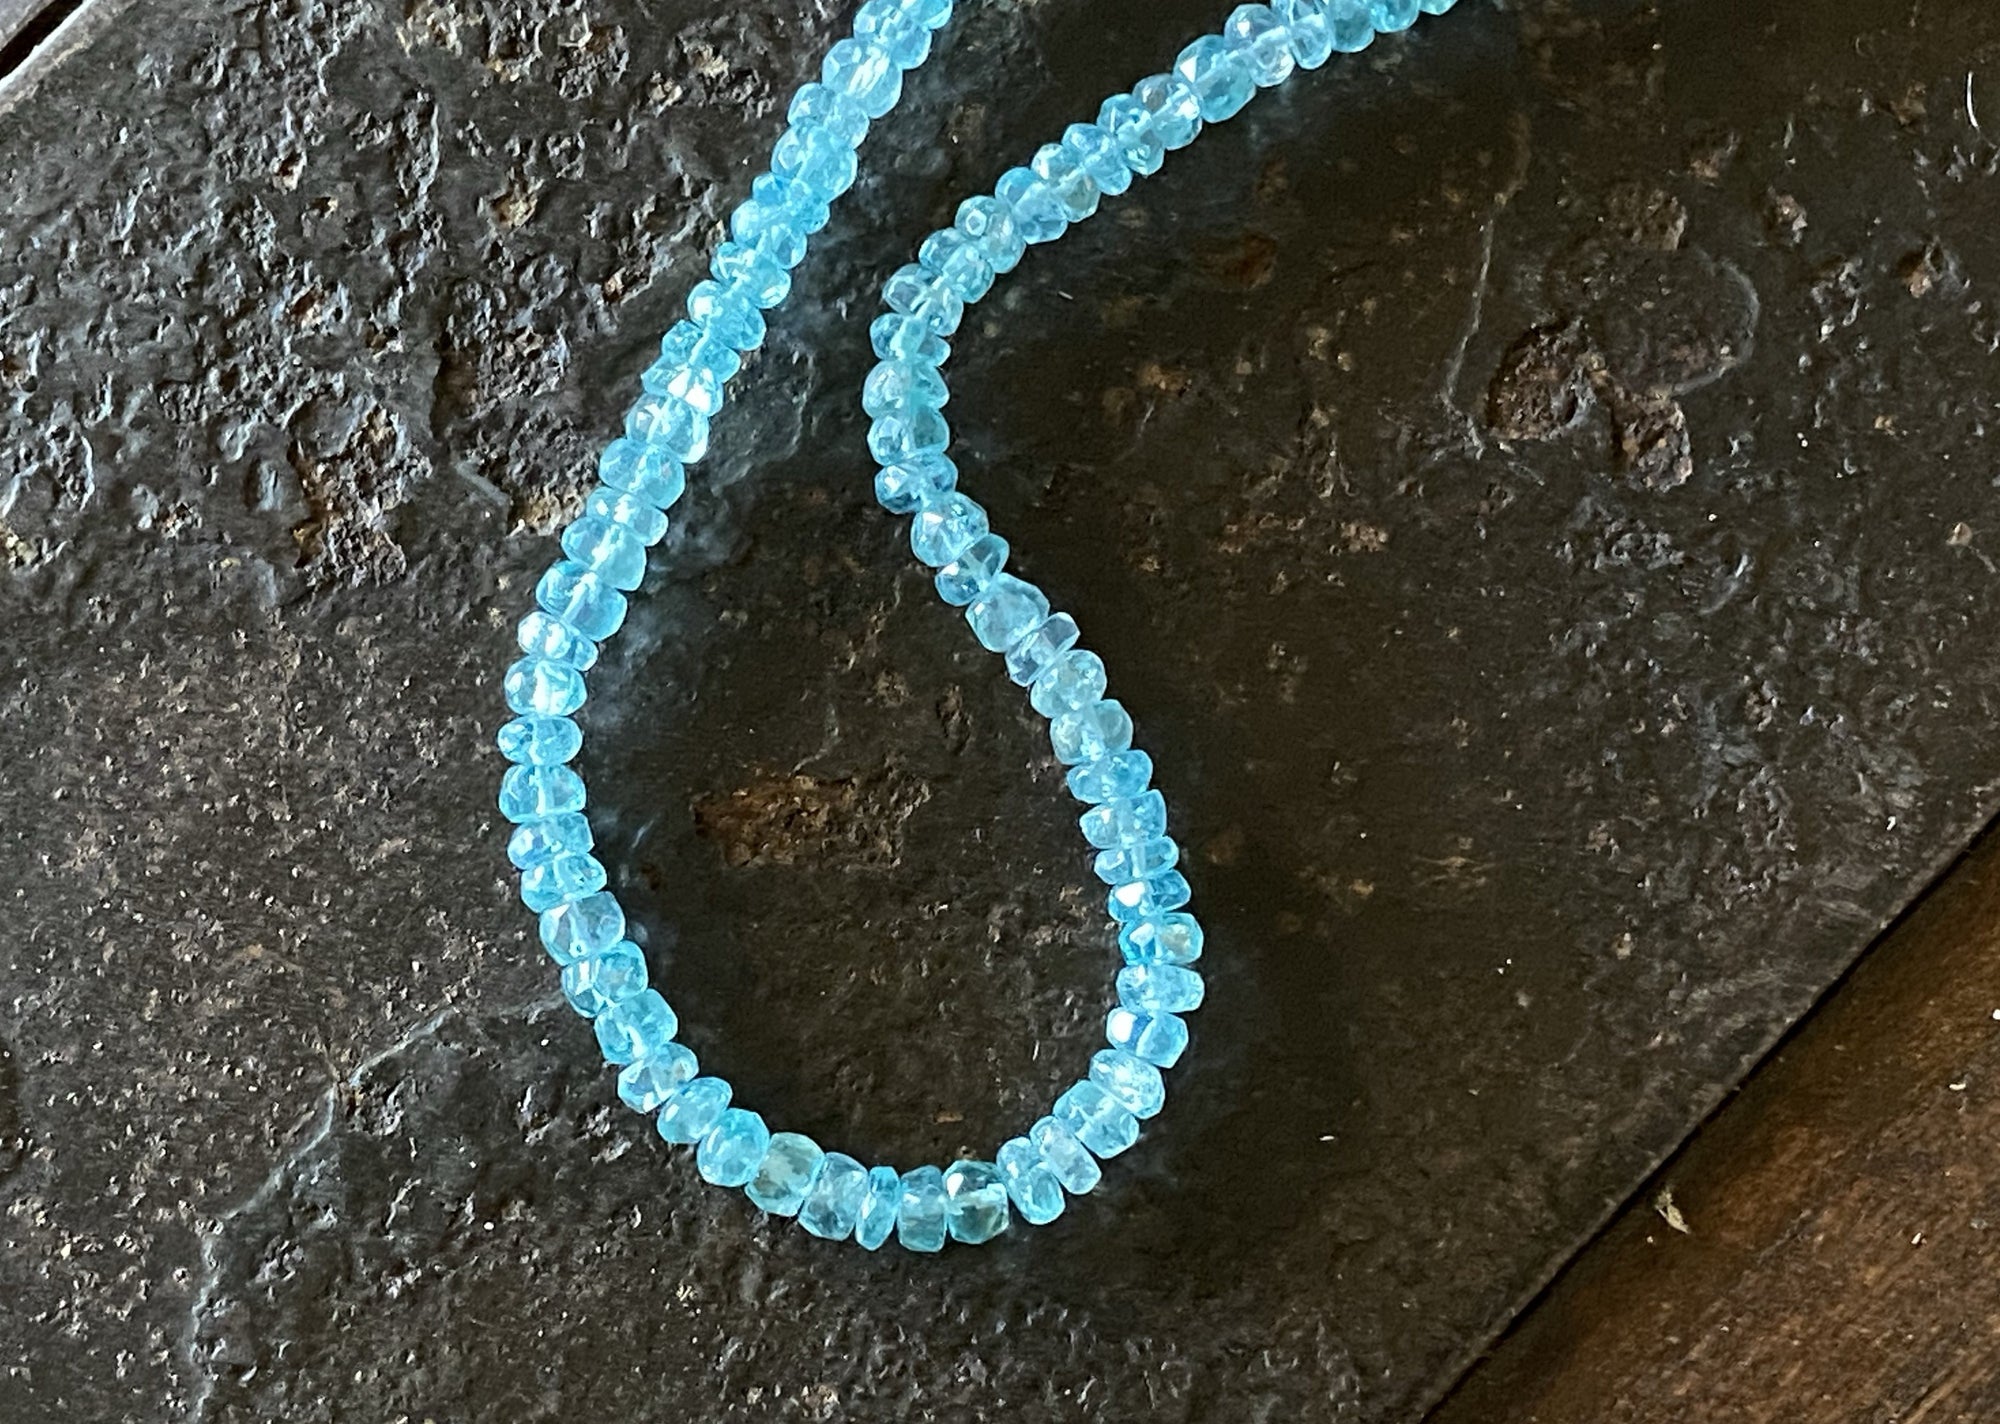 Light blue facet cut apatite bead necklace with sterling silver lobster clasp. The apatite is natural, not dyed or heat treated.